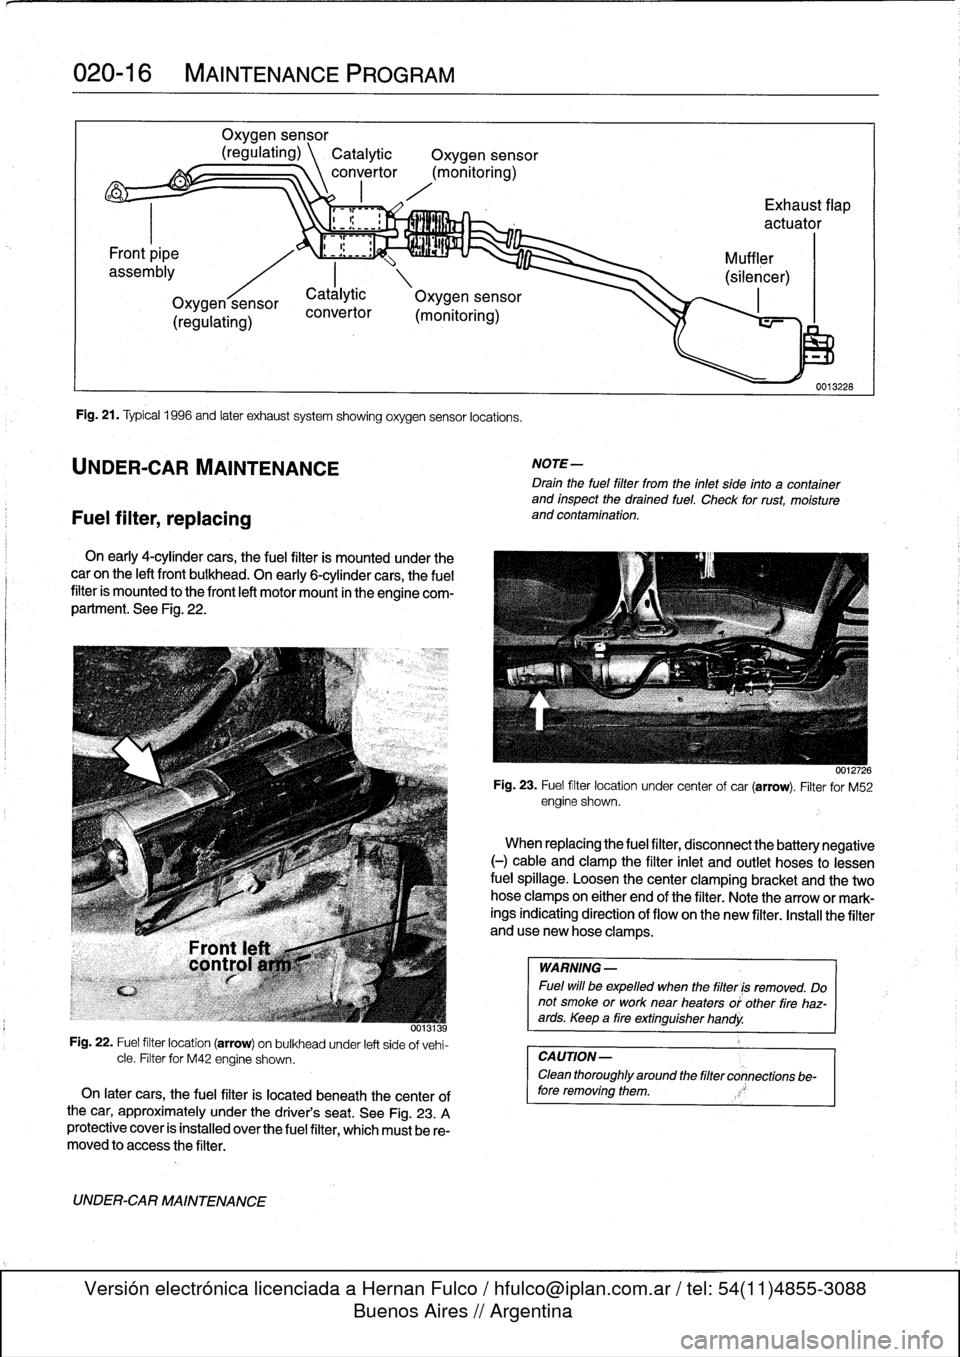 BMW 328i 1994 E36 Workshop Manual 
020-
1
6

	

MAINTENANCE
PROGRAM

Fuel
filter,
replacing

Oxygen
sensor

(regulating)
\
Catalytic

	

Oxygen
sensor
convertor
(monitoring)

Fig
.
21
.
Typical
1996
and
later
exhaust
system
showing
ox